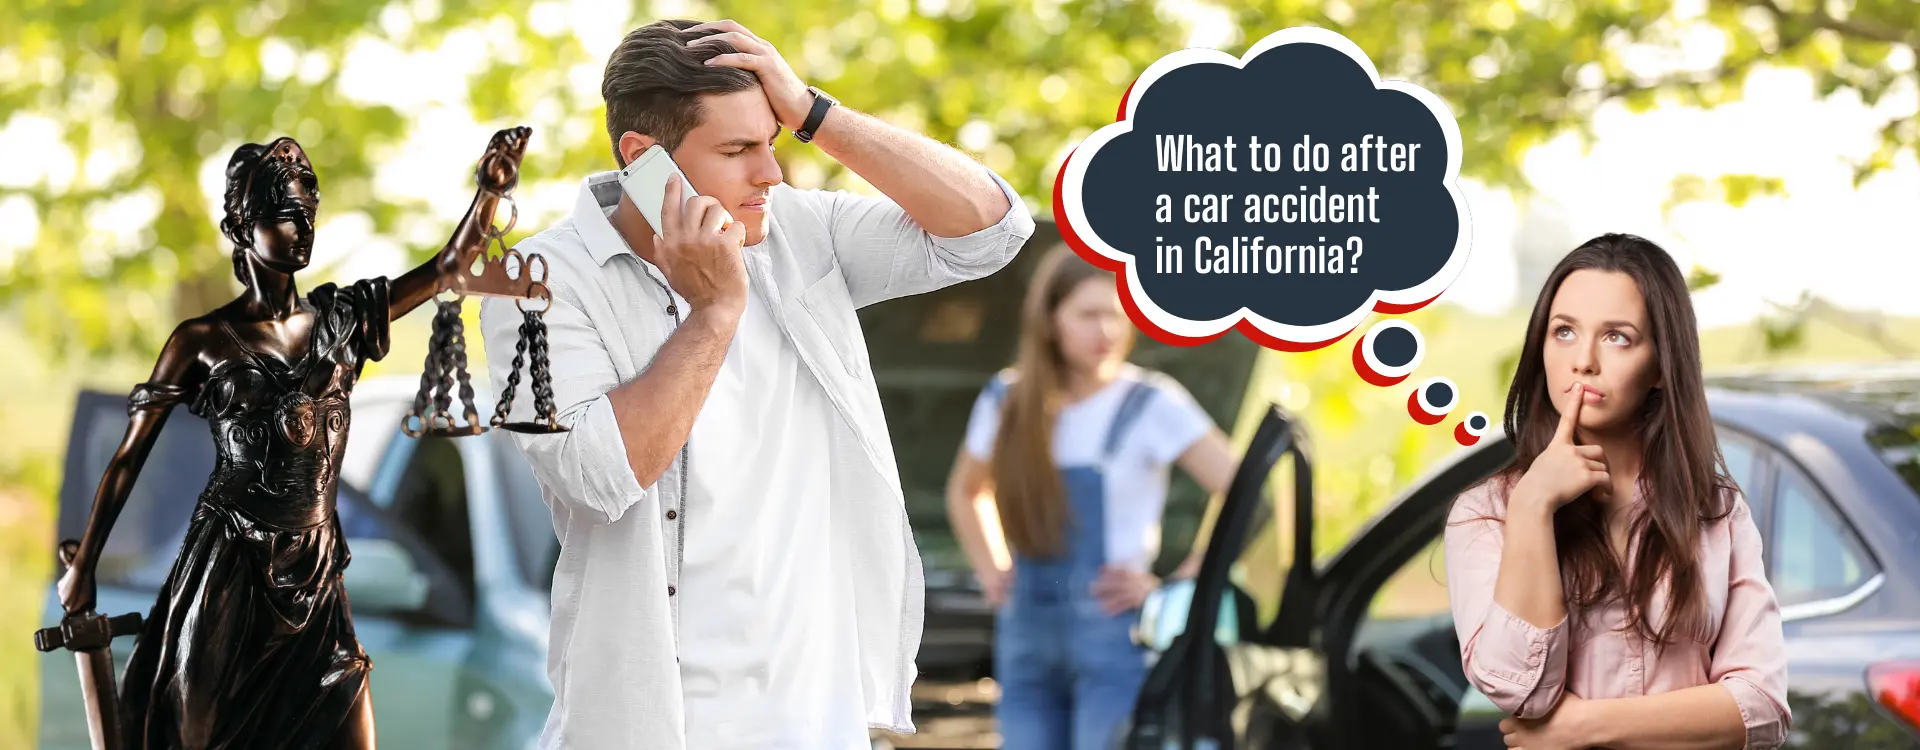 what to do after a car accident in california